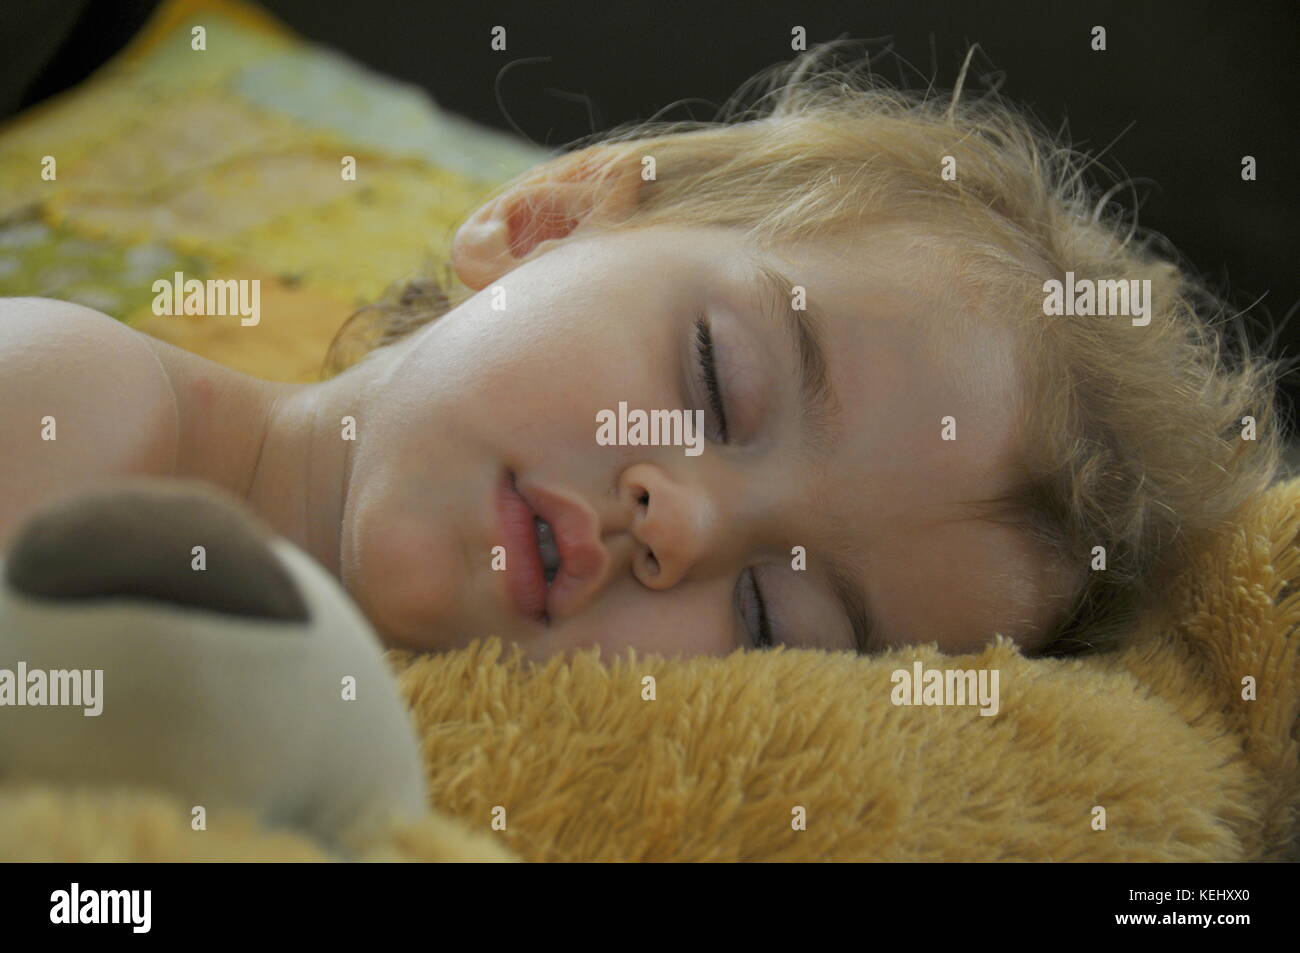 a baby girl resting Stock Photo